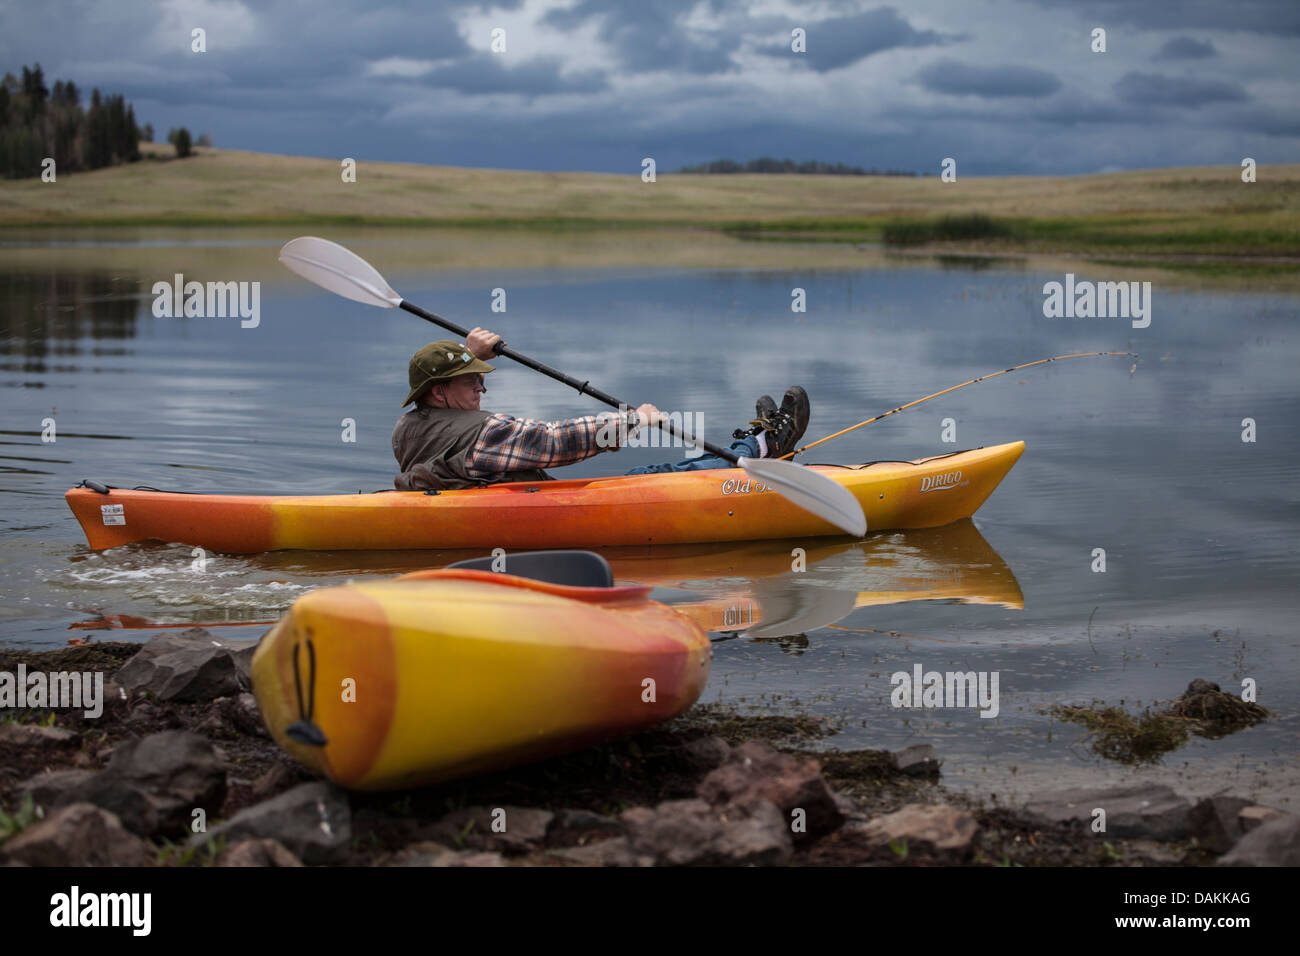 Young man in yellow orange kayak is paddling into a lake in Arizona with his feet and fishing pole propped up on front of boat. Stock Photo